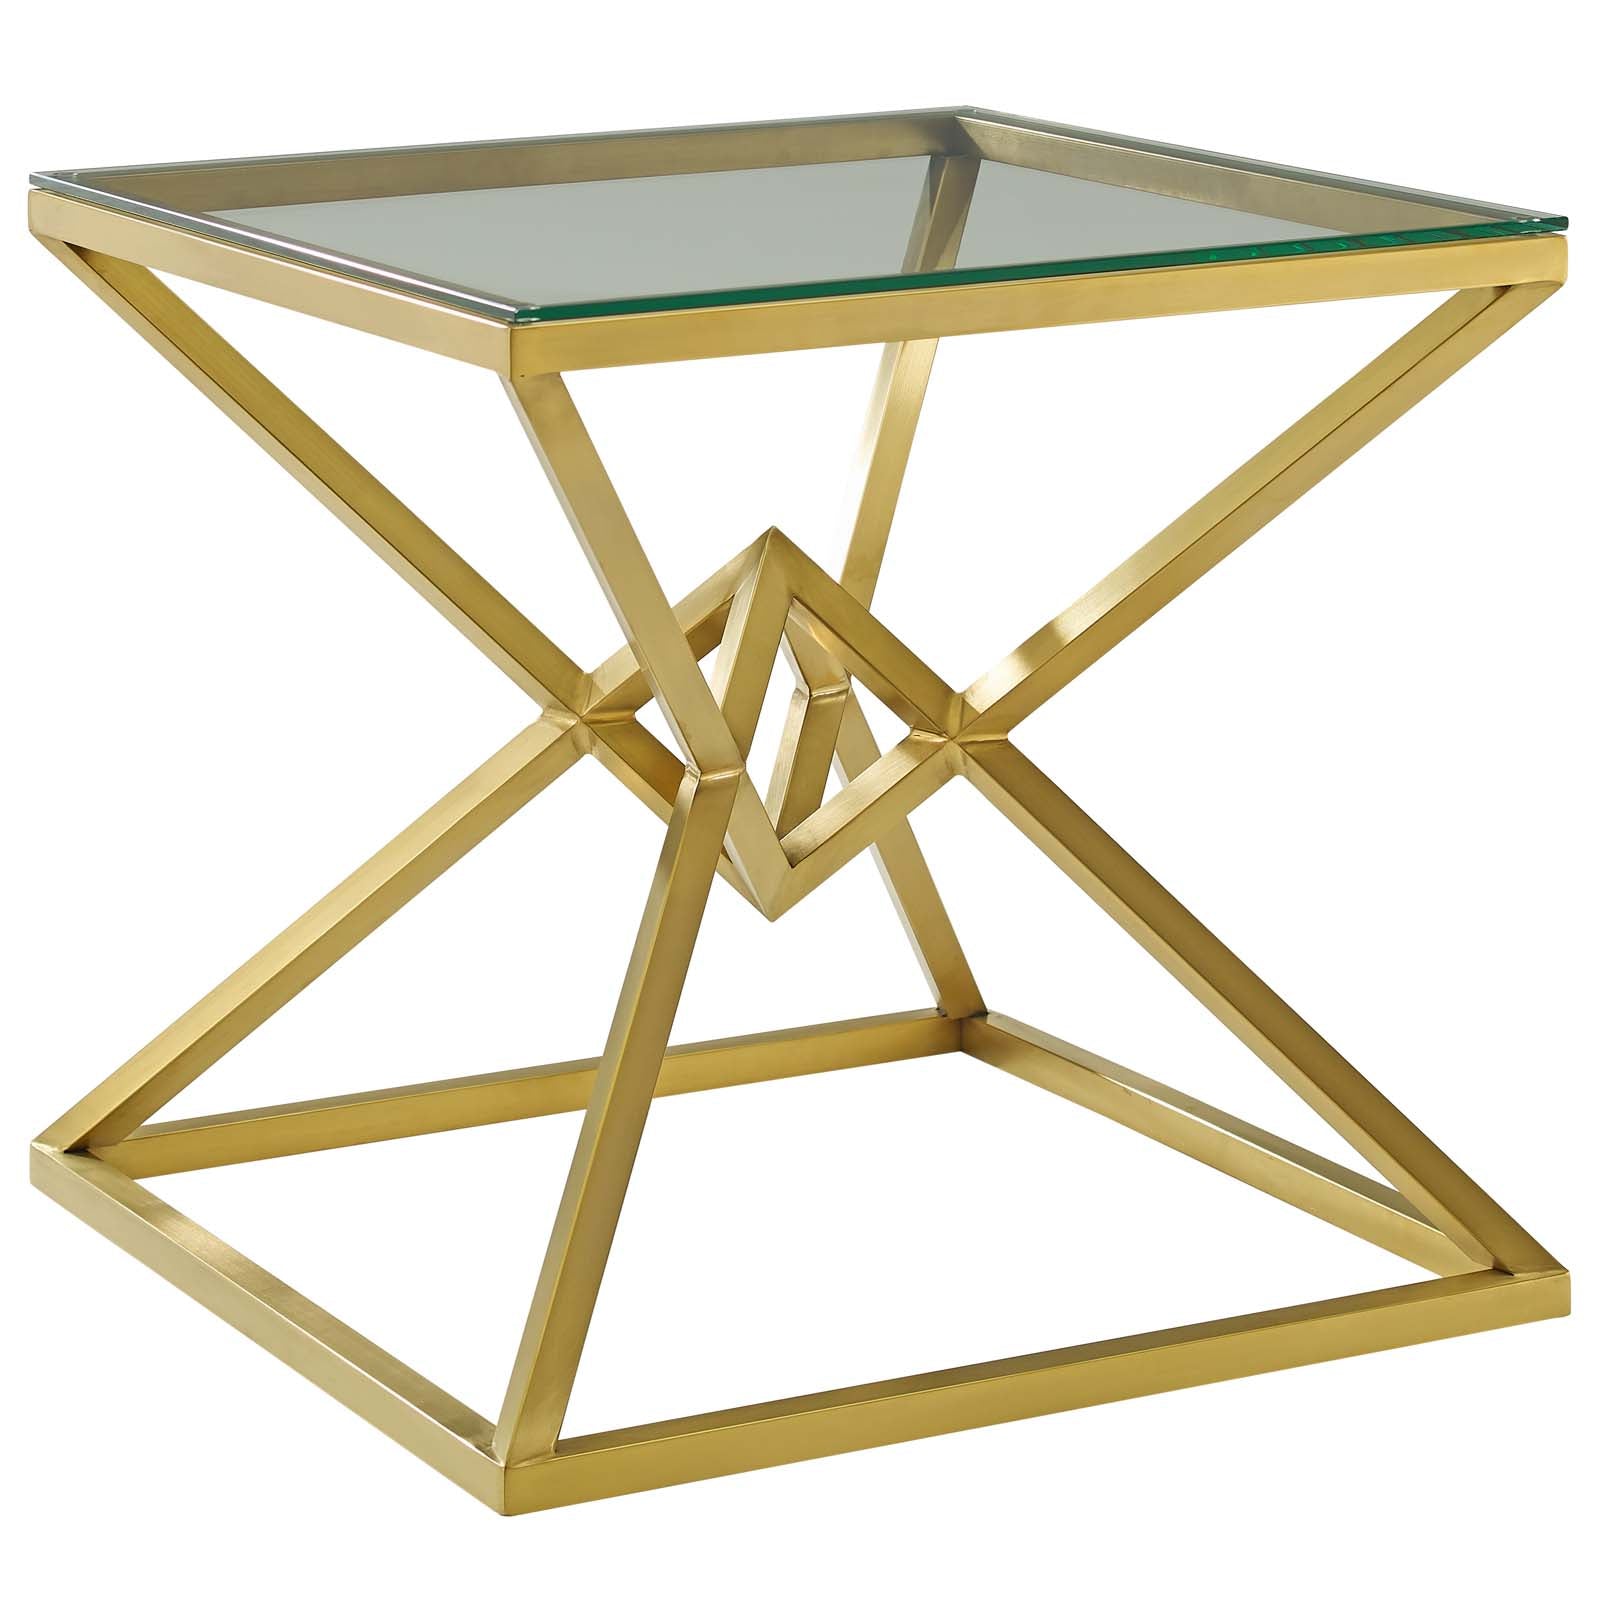 Point 25.5" Brushed Gold Metal Stainless Steel Side Table